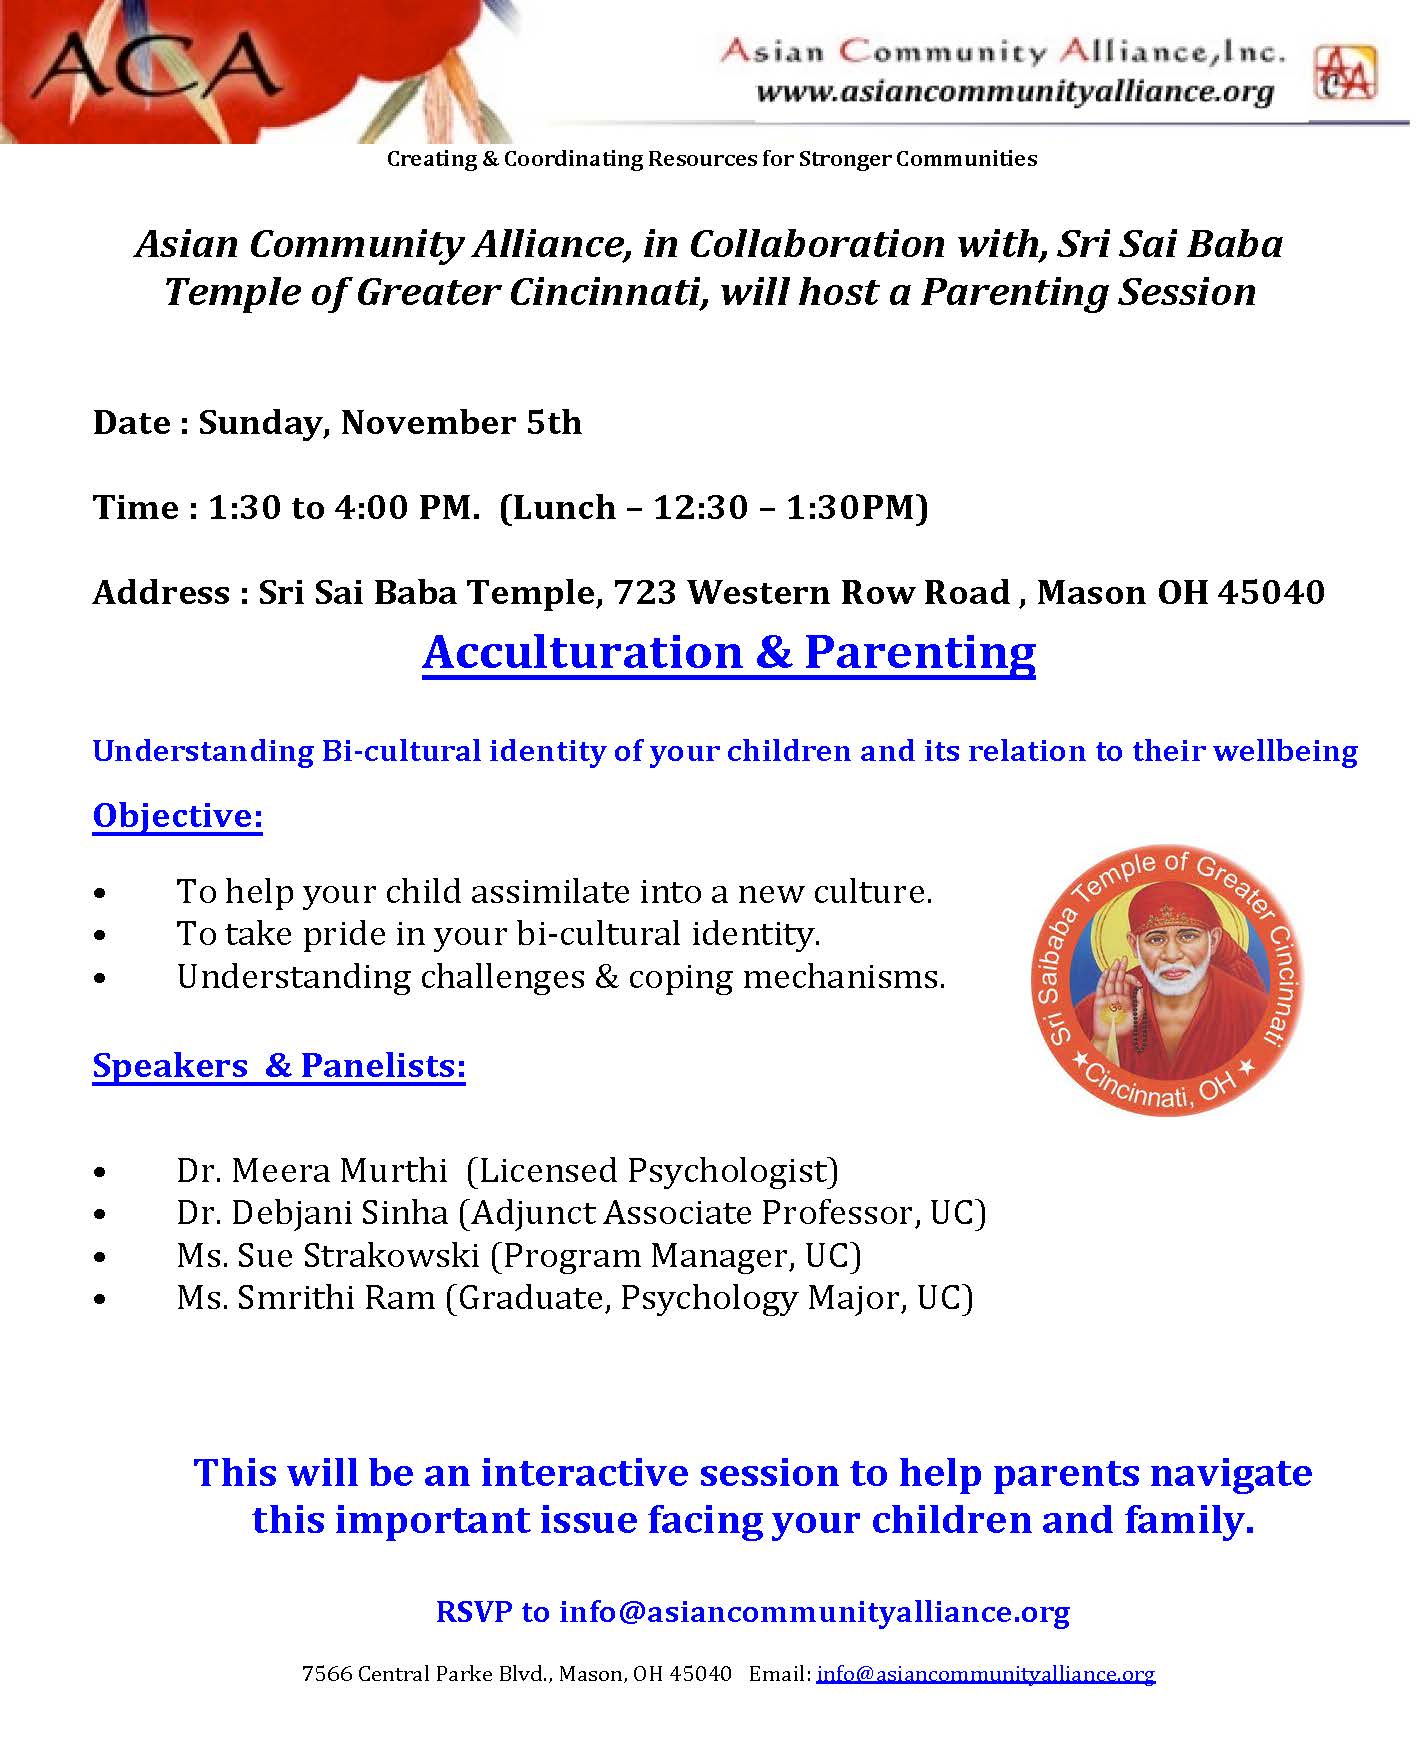 Parenting and Acculturation flyer